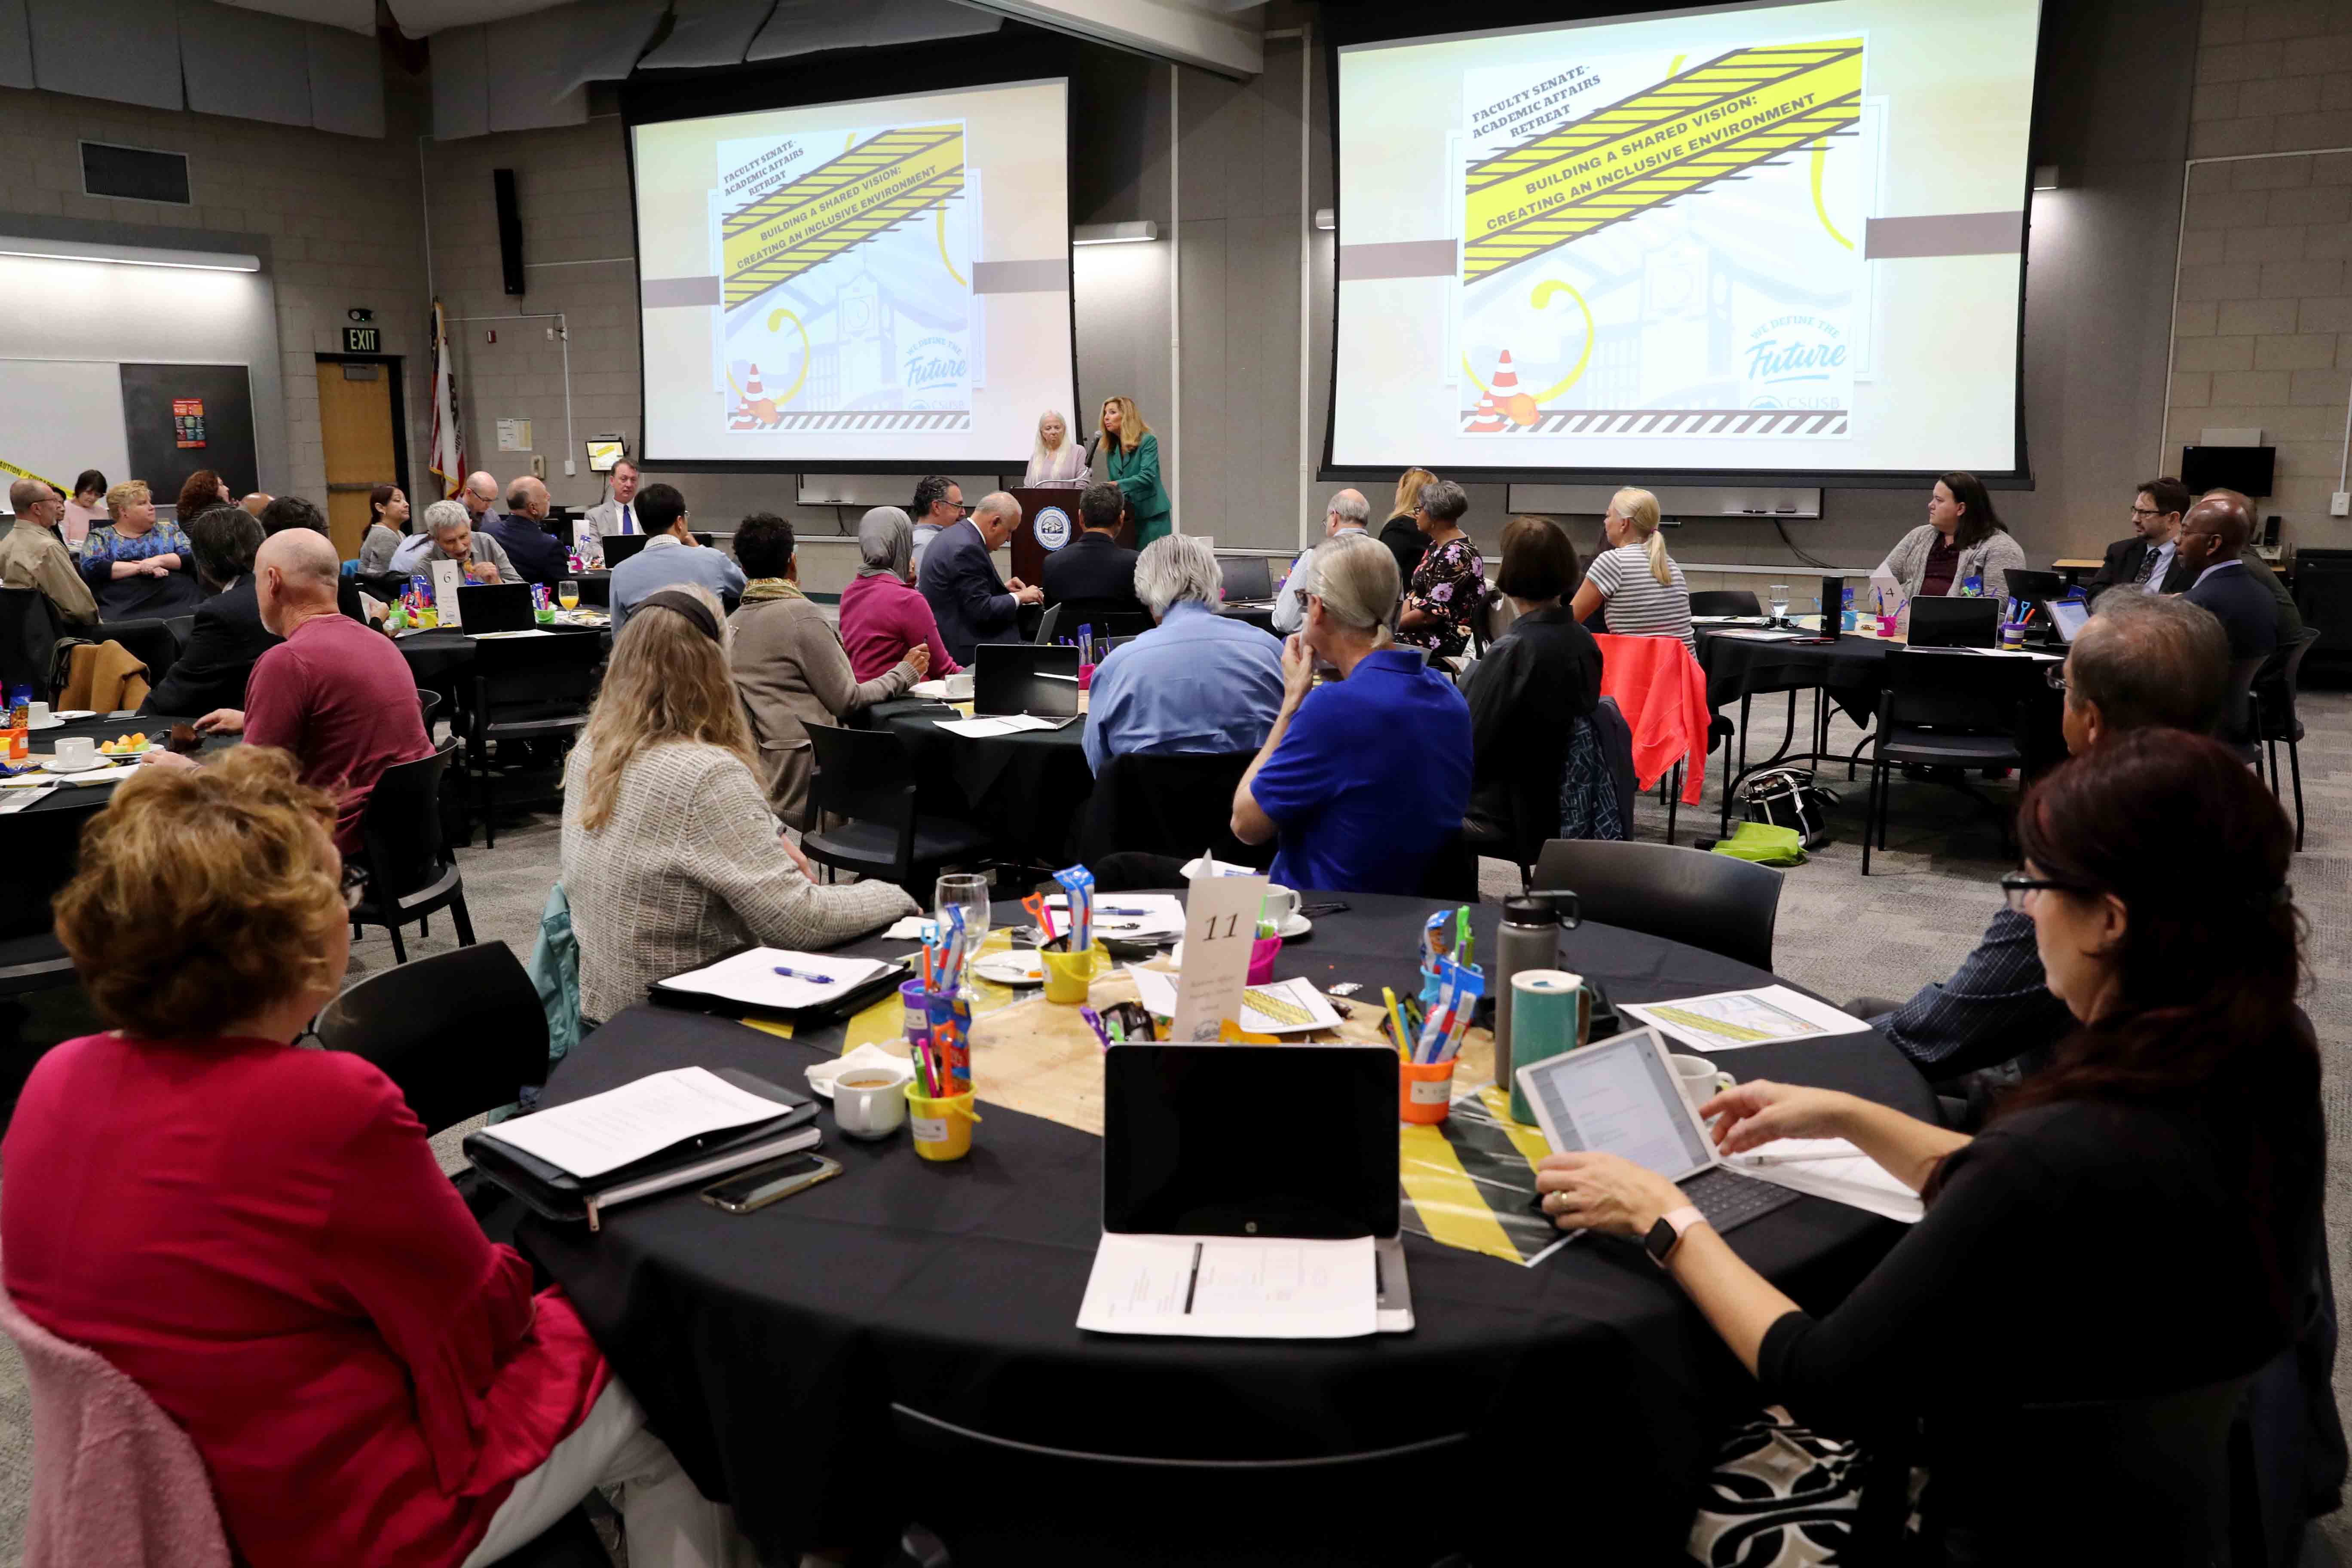 “Building a Shared Vision: Creating an Inclusive Environment” featured presentations on equity gaps on campus, ways to close the gaps as well as roundtable discussions. 